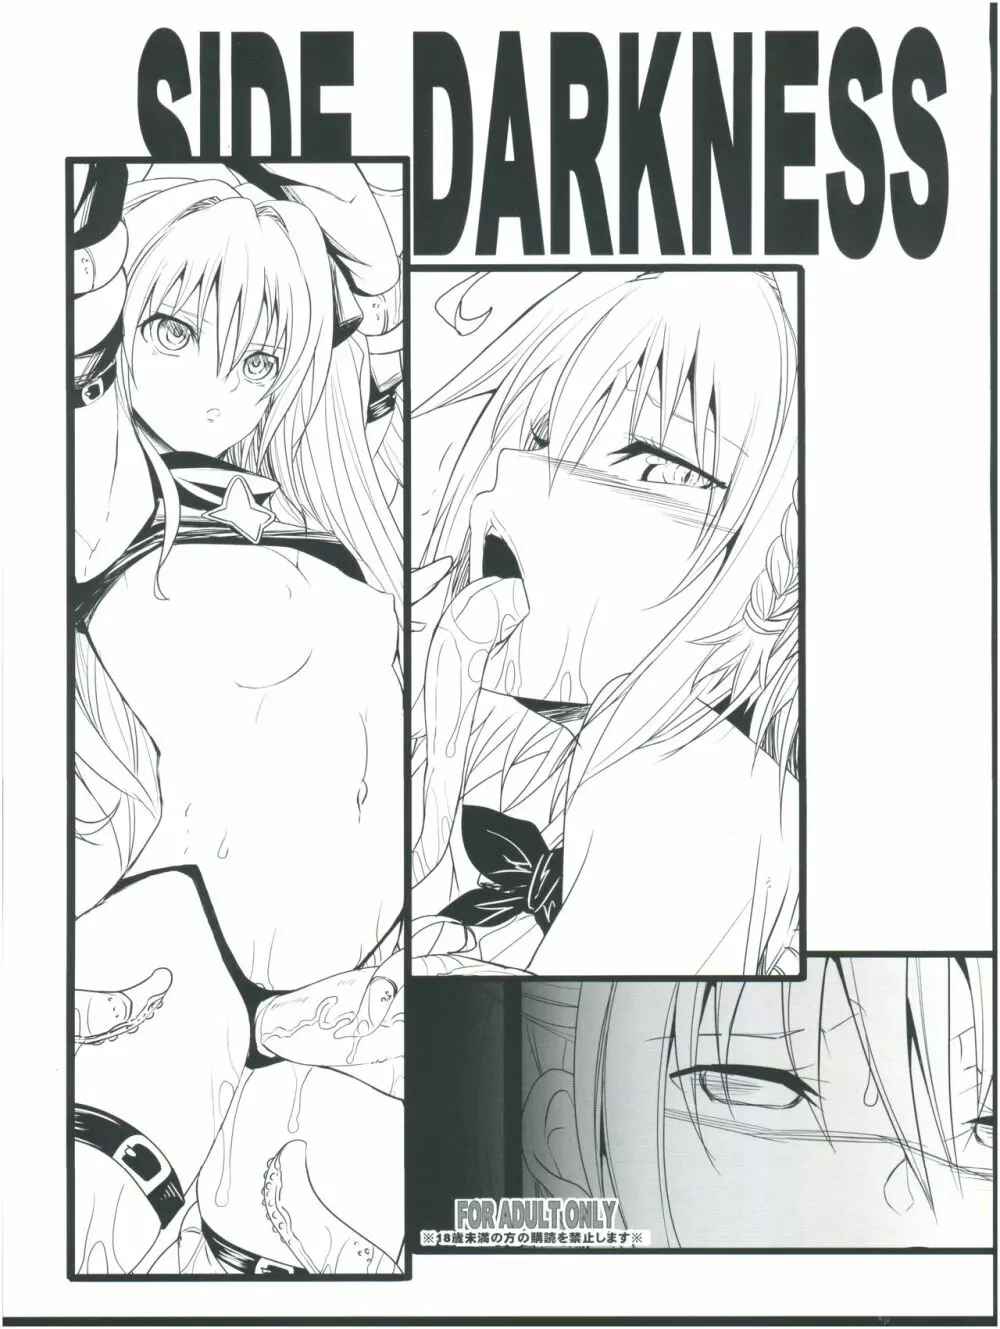 SIDE DARKNESS - page1